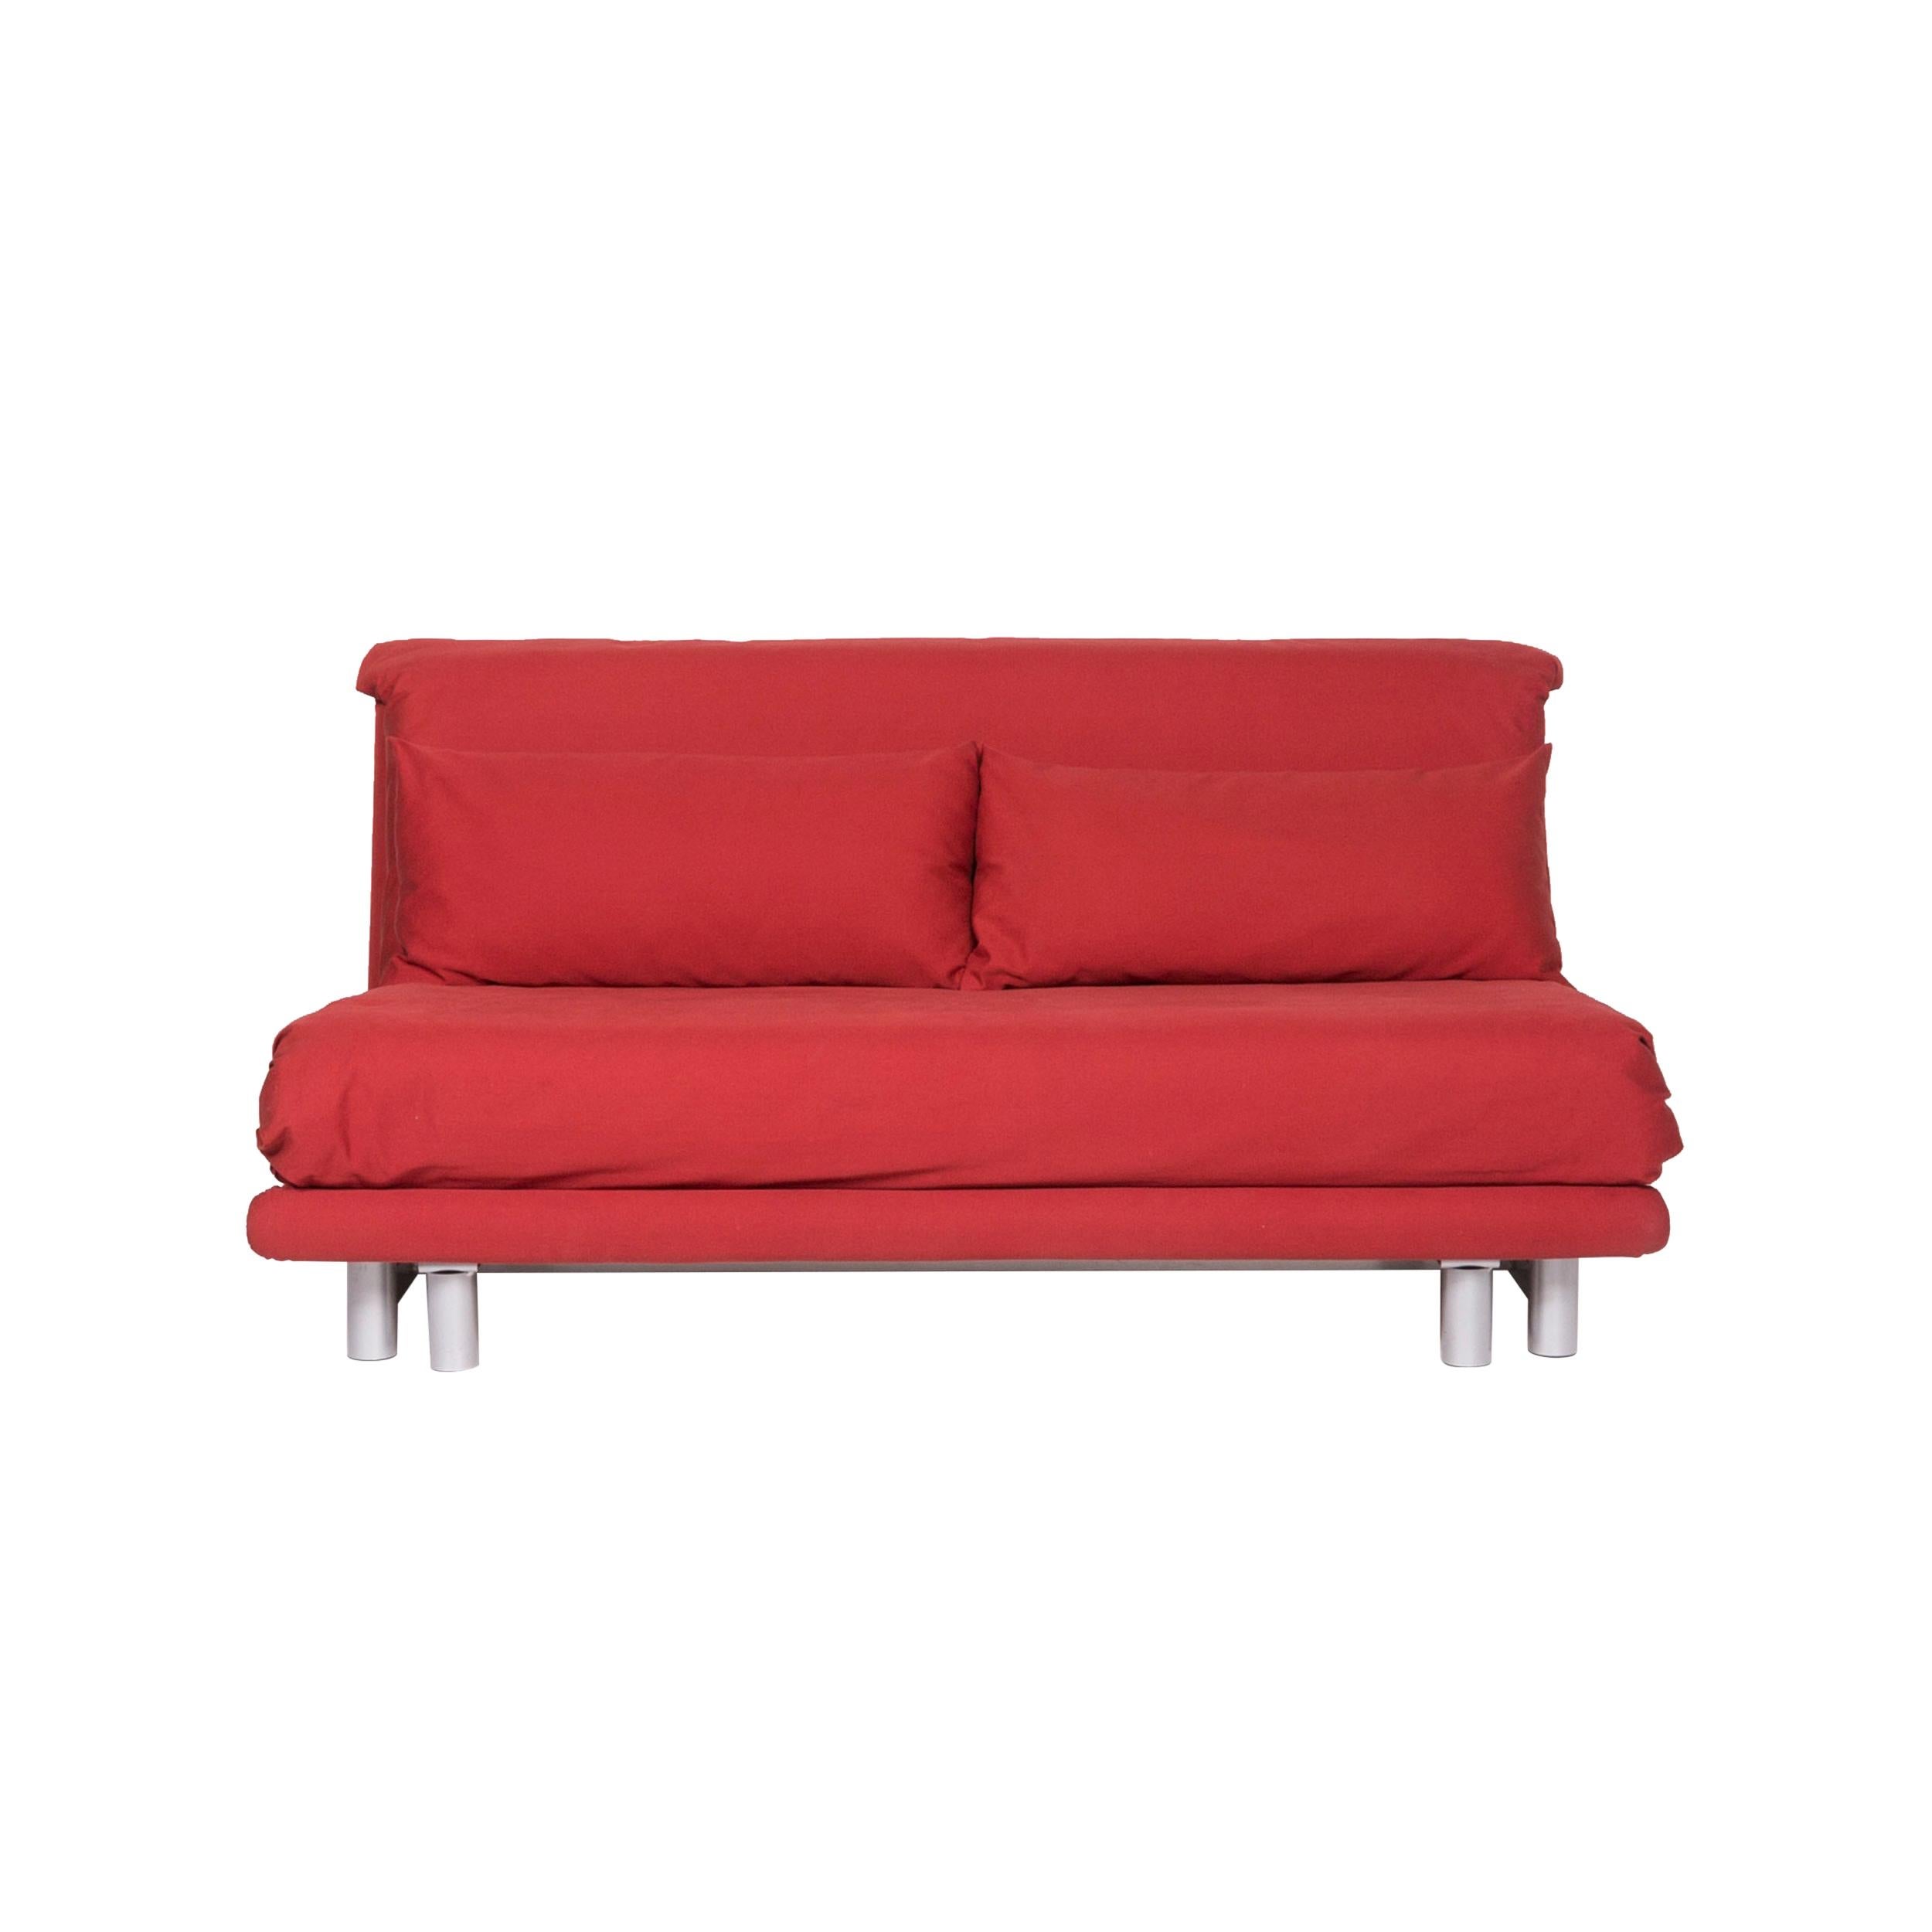 Ligne Roset Multy Fabric Sofa Bed Red Sofa Sleep Function Couch